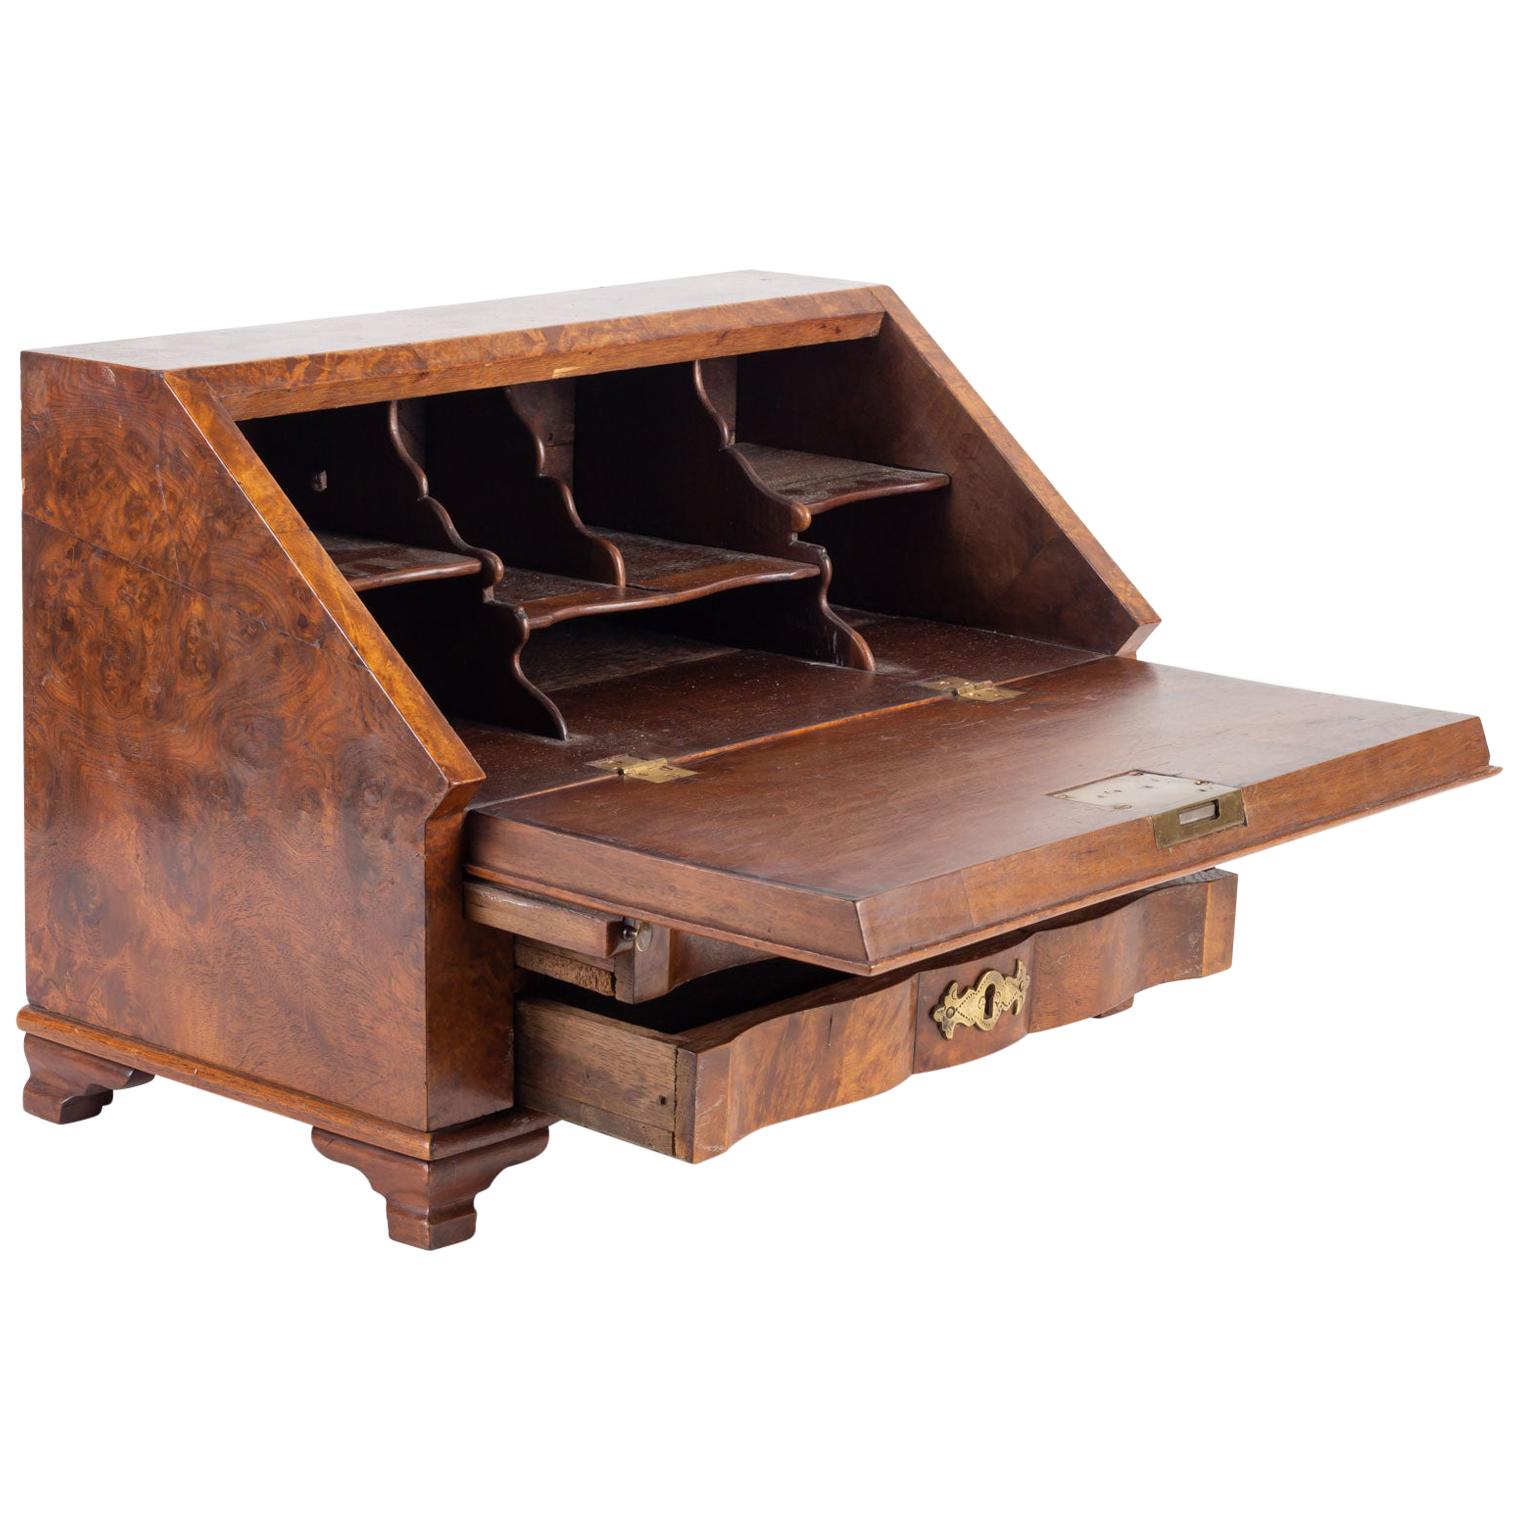 Trade Furniture Forming a Miniature Secretary Writing Table, 19th Century